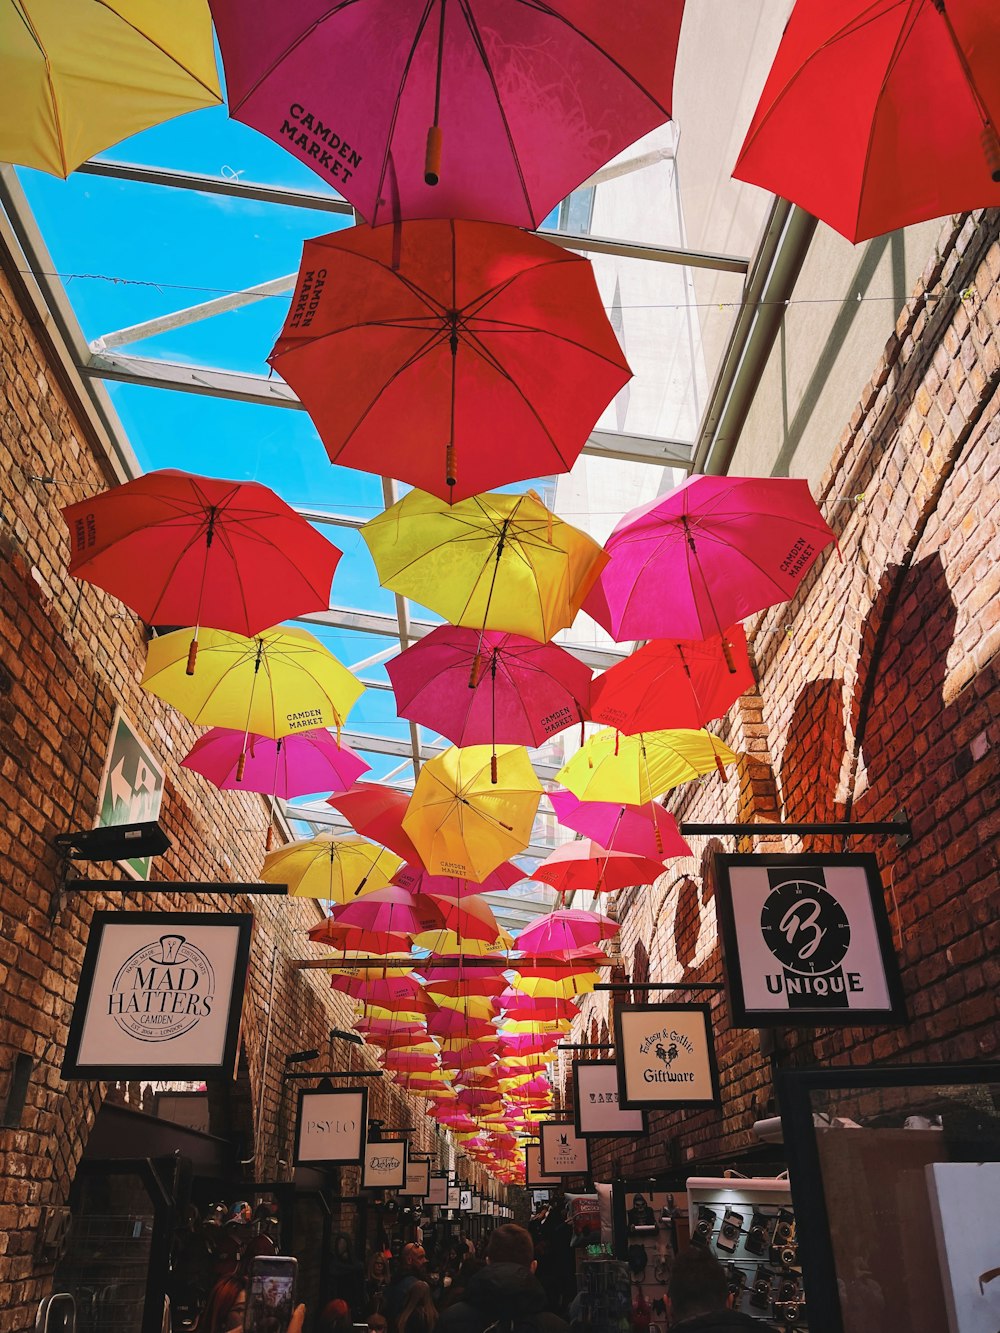 A group of umbrellas hanging from the ceiling of a building photo – Free  United kingdom Image on Unsplash